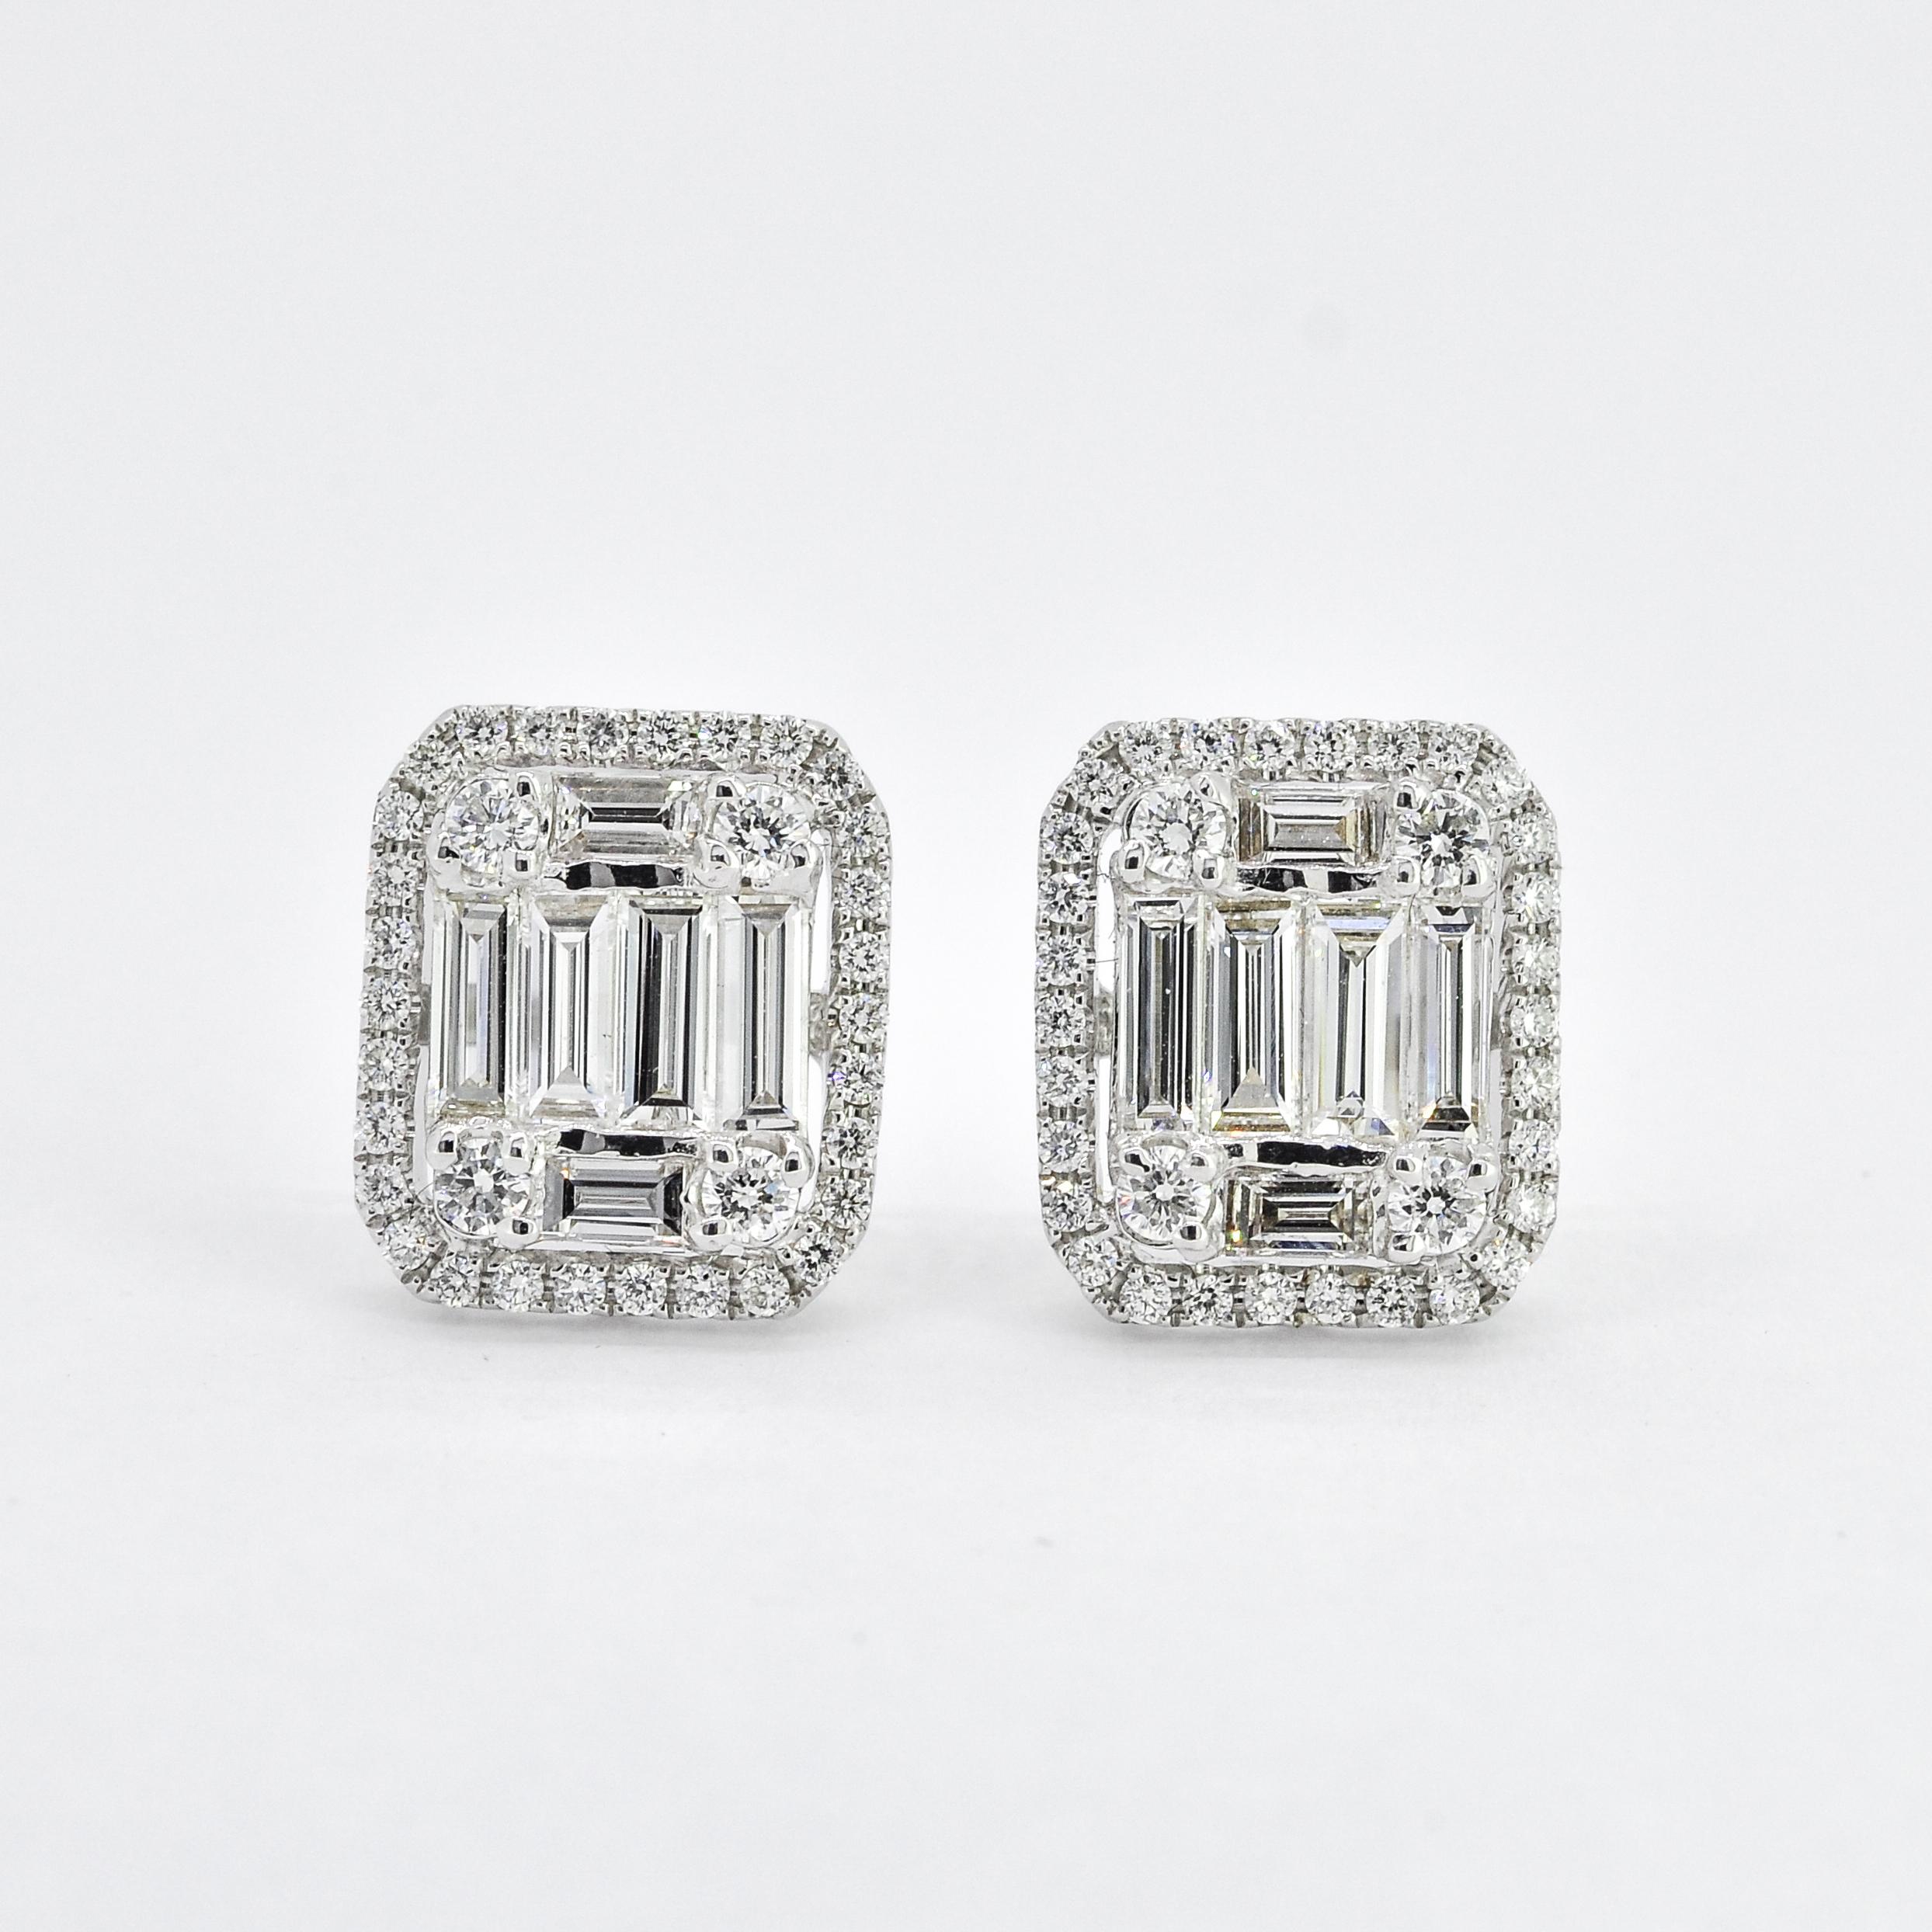 Introducing these luxurious 18KT White Gold stud earrings, featuring a diamond halo of natural diamonds with baguette cut illusion cluster center. These earrings are handcrafted to perfection and designed to add a touch of elegance to any outfit.